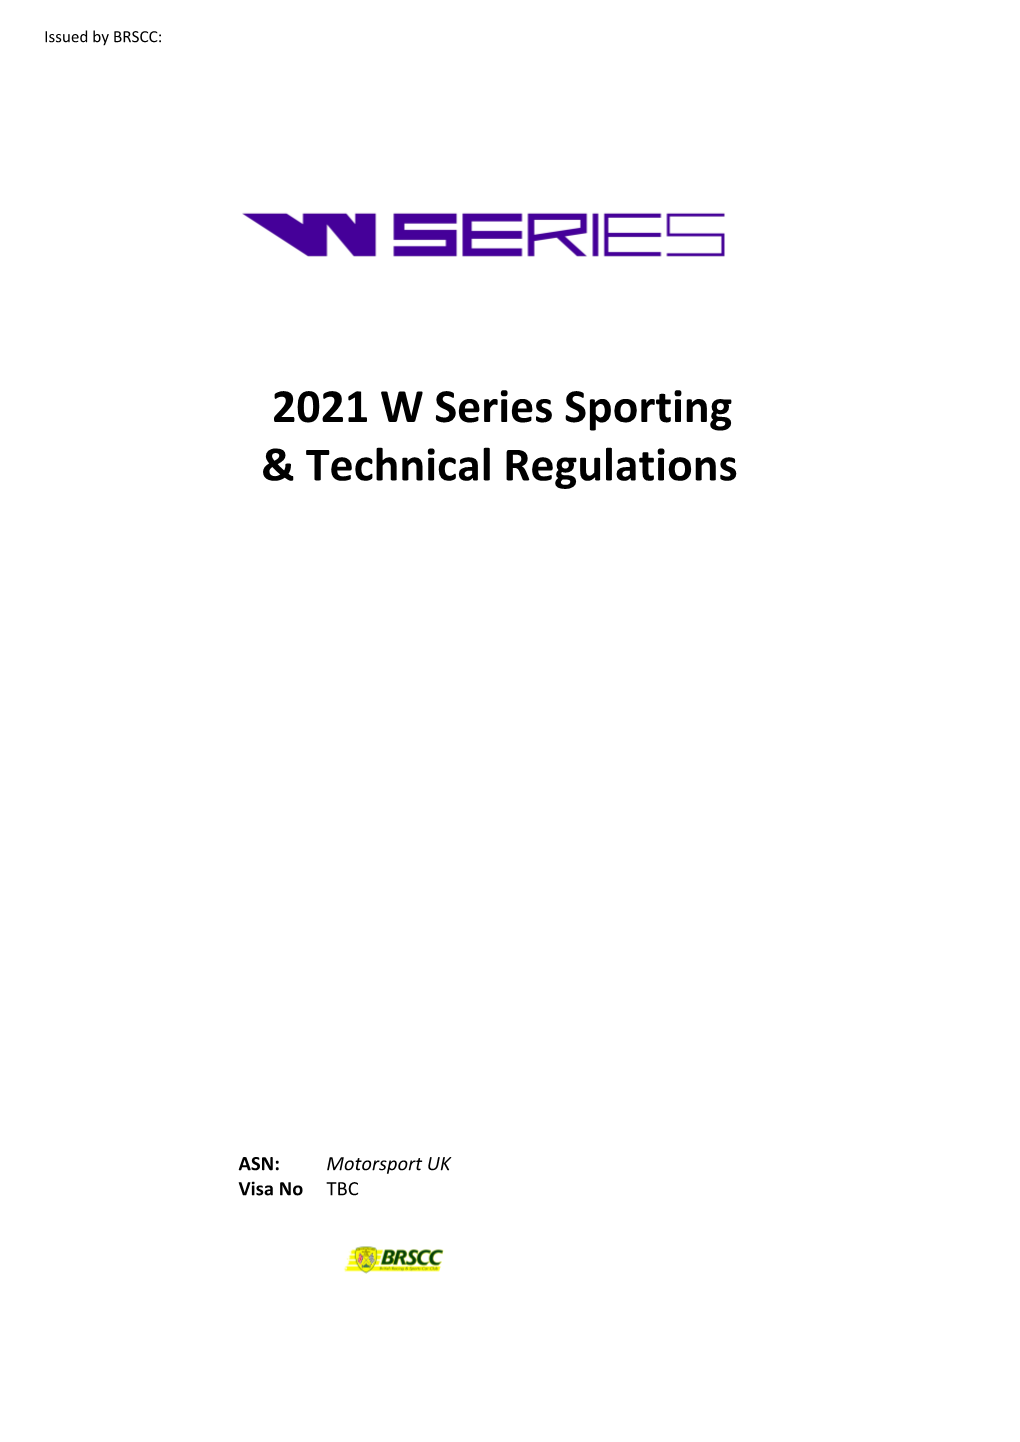 2021 W Series Sporting & Technical Regulations